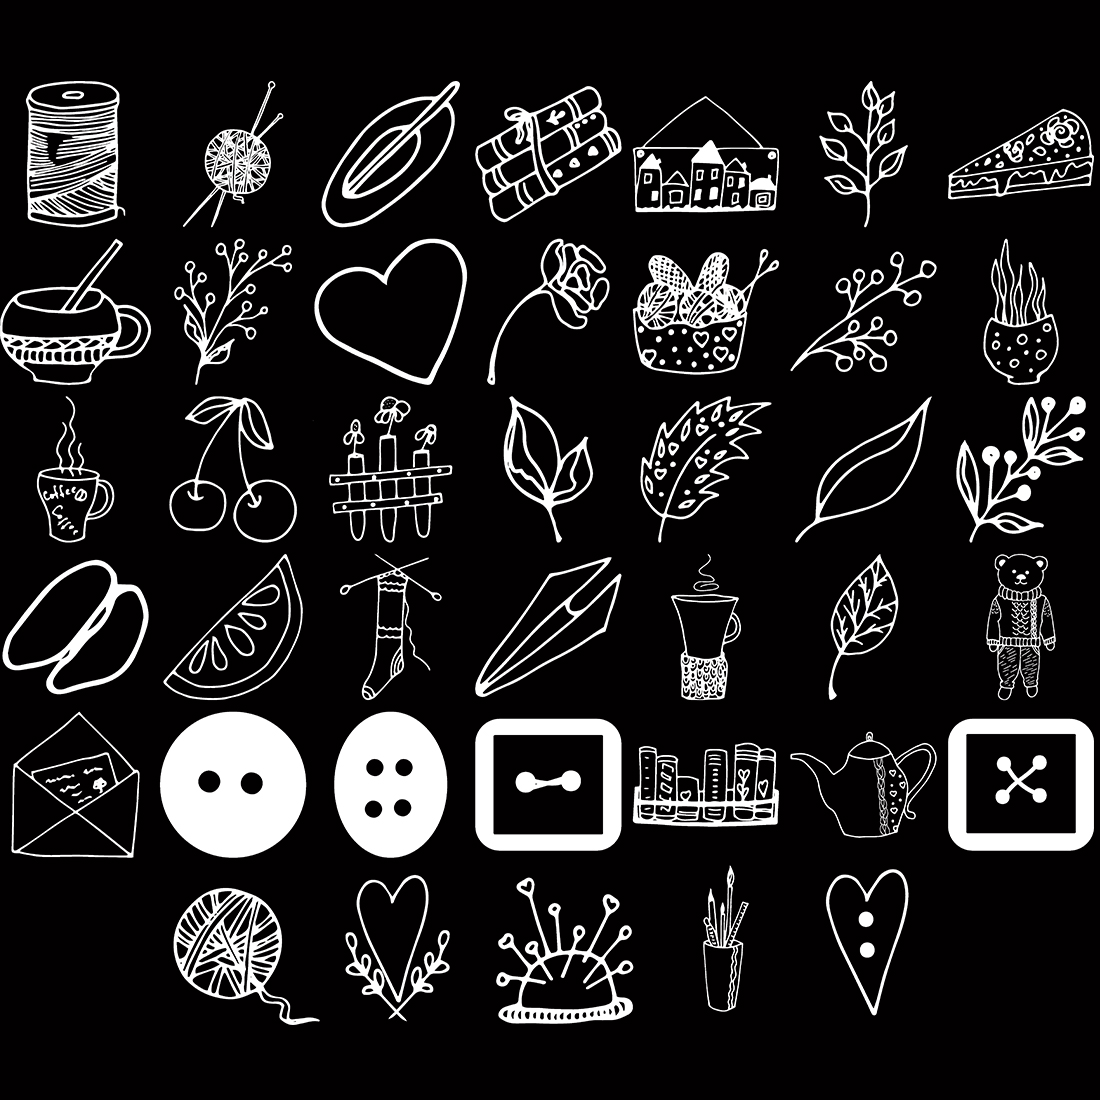 Knitting Clipart, Handicraft clipart, Black and White Doodles, Hand-Drawn Doodles.